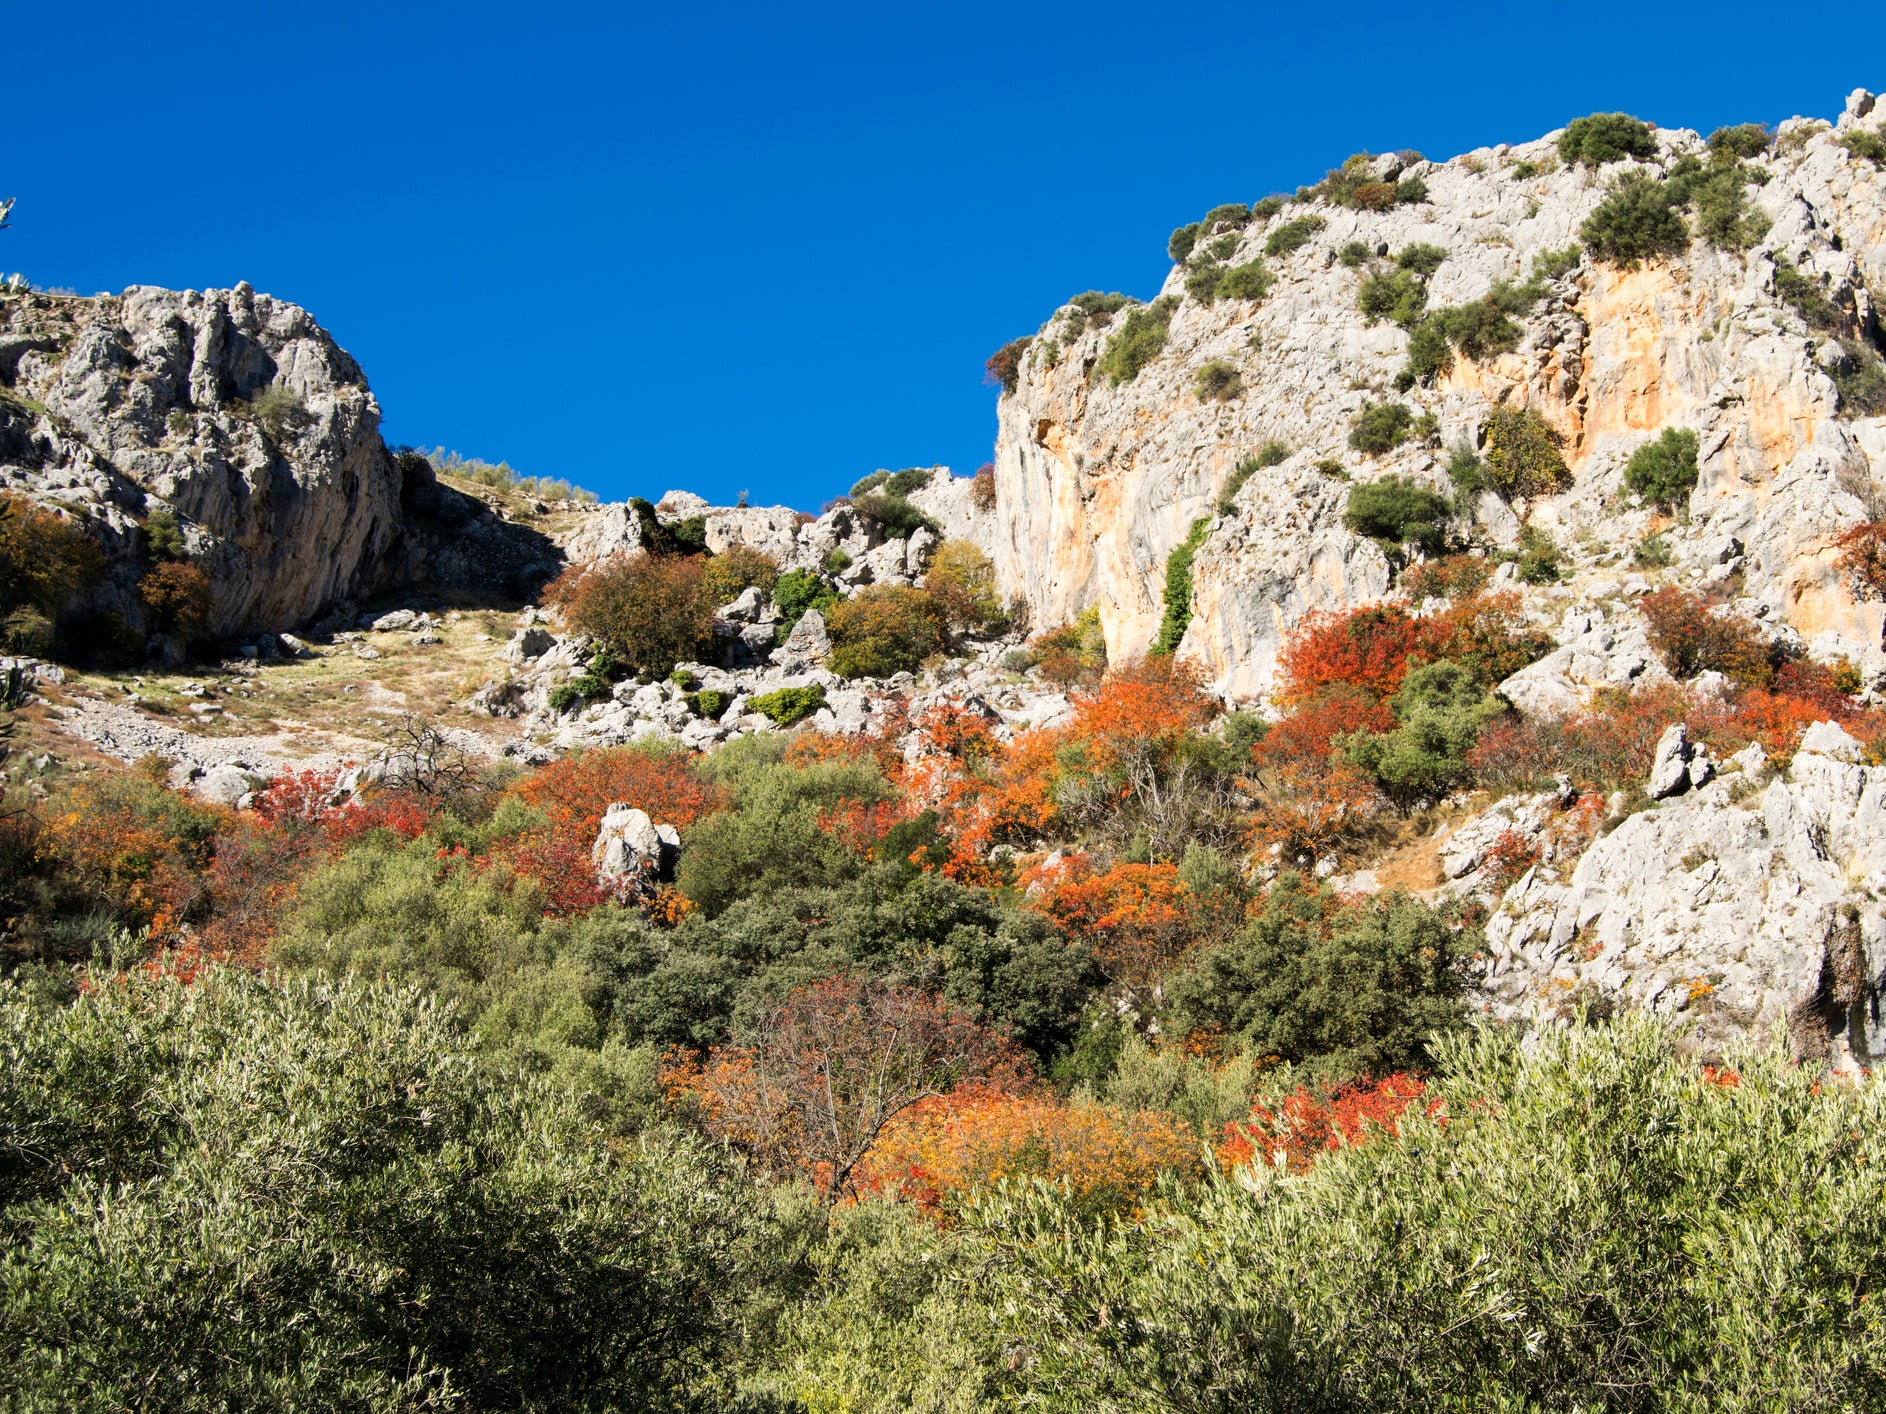 Sierras Subbéticas National Park in Andalusia is a great spot for springtime hiking